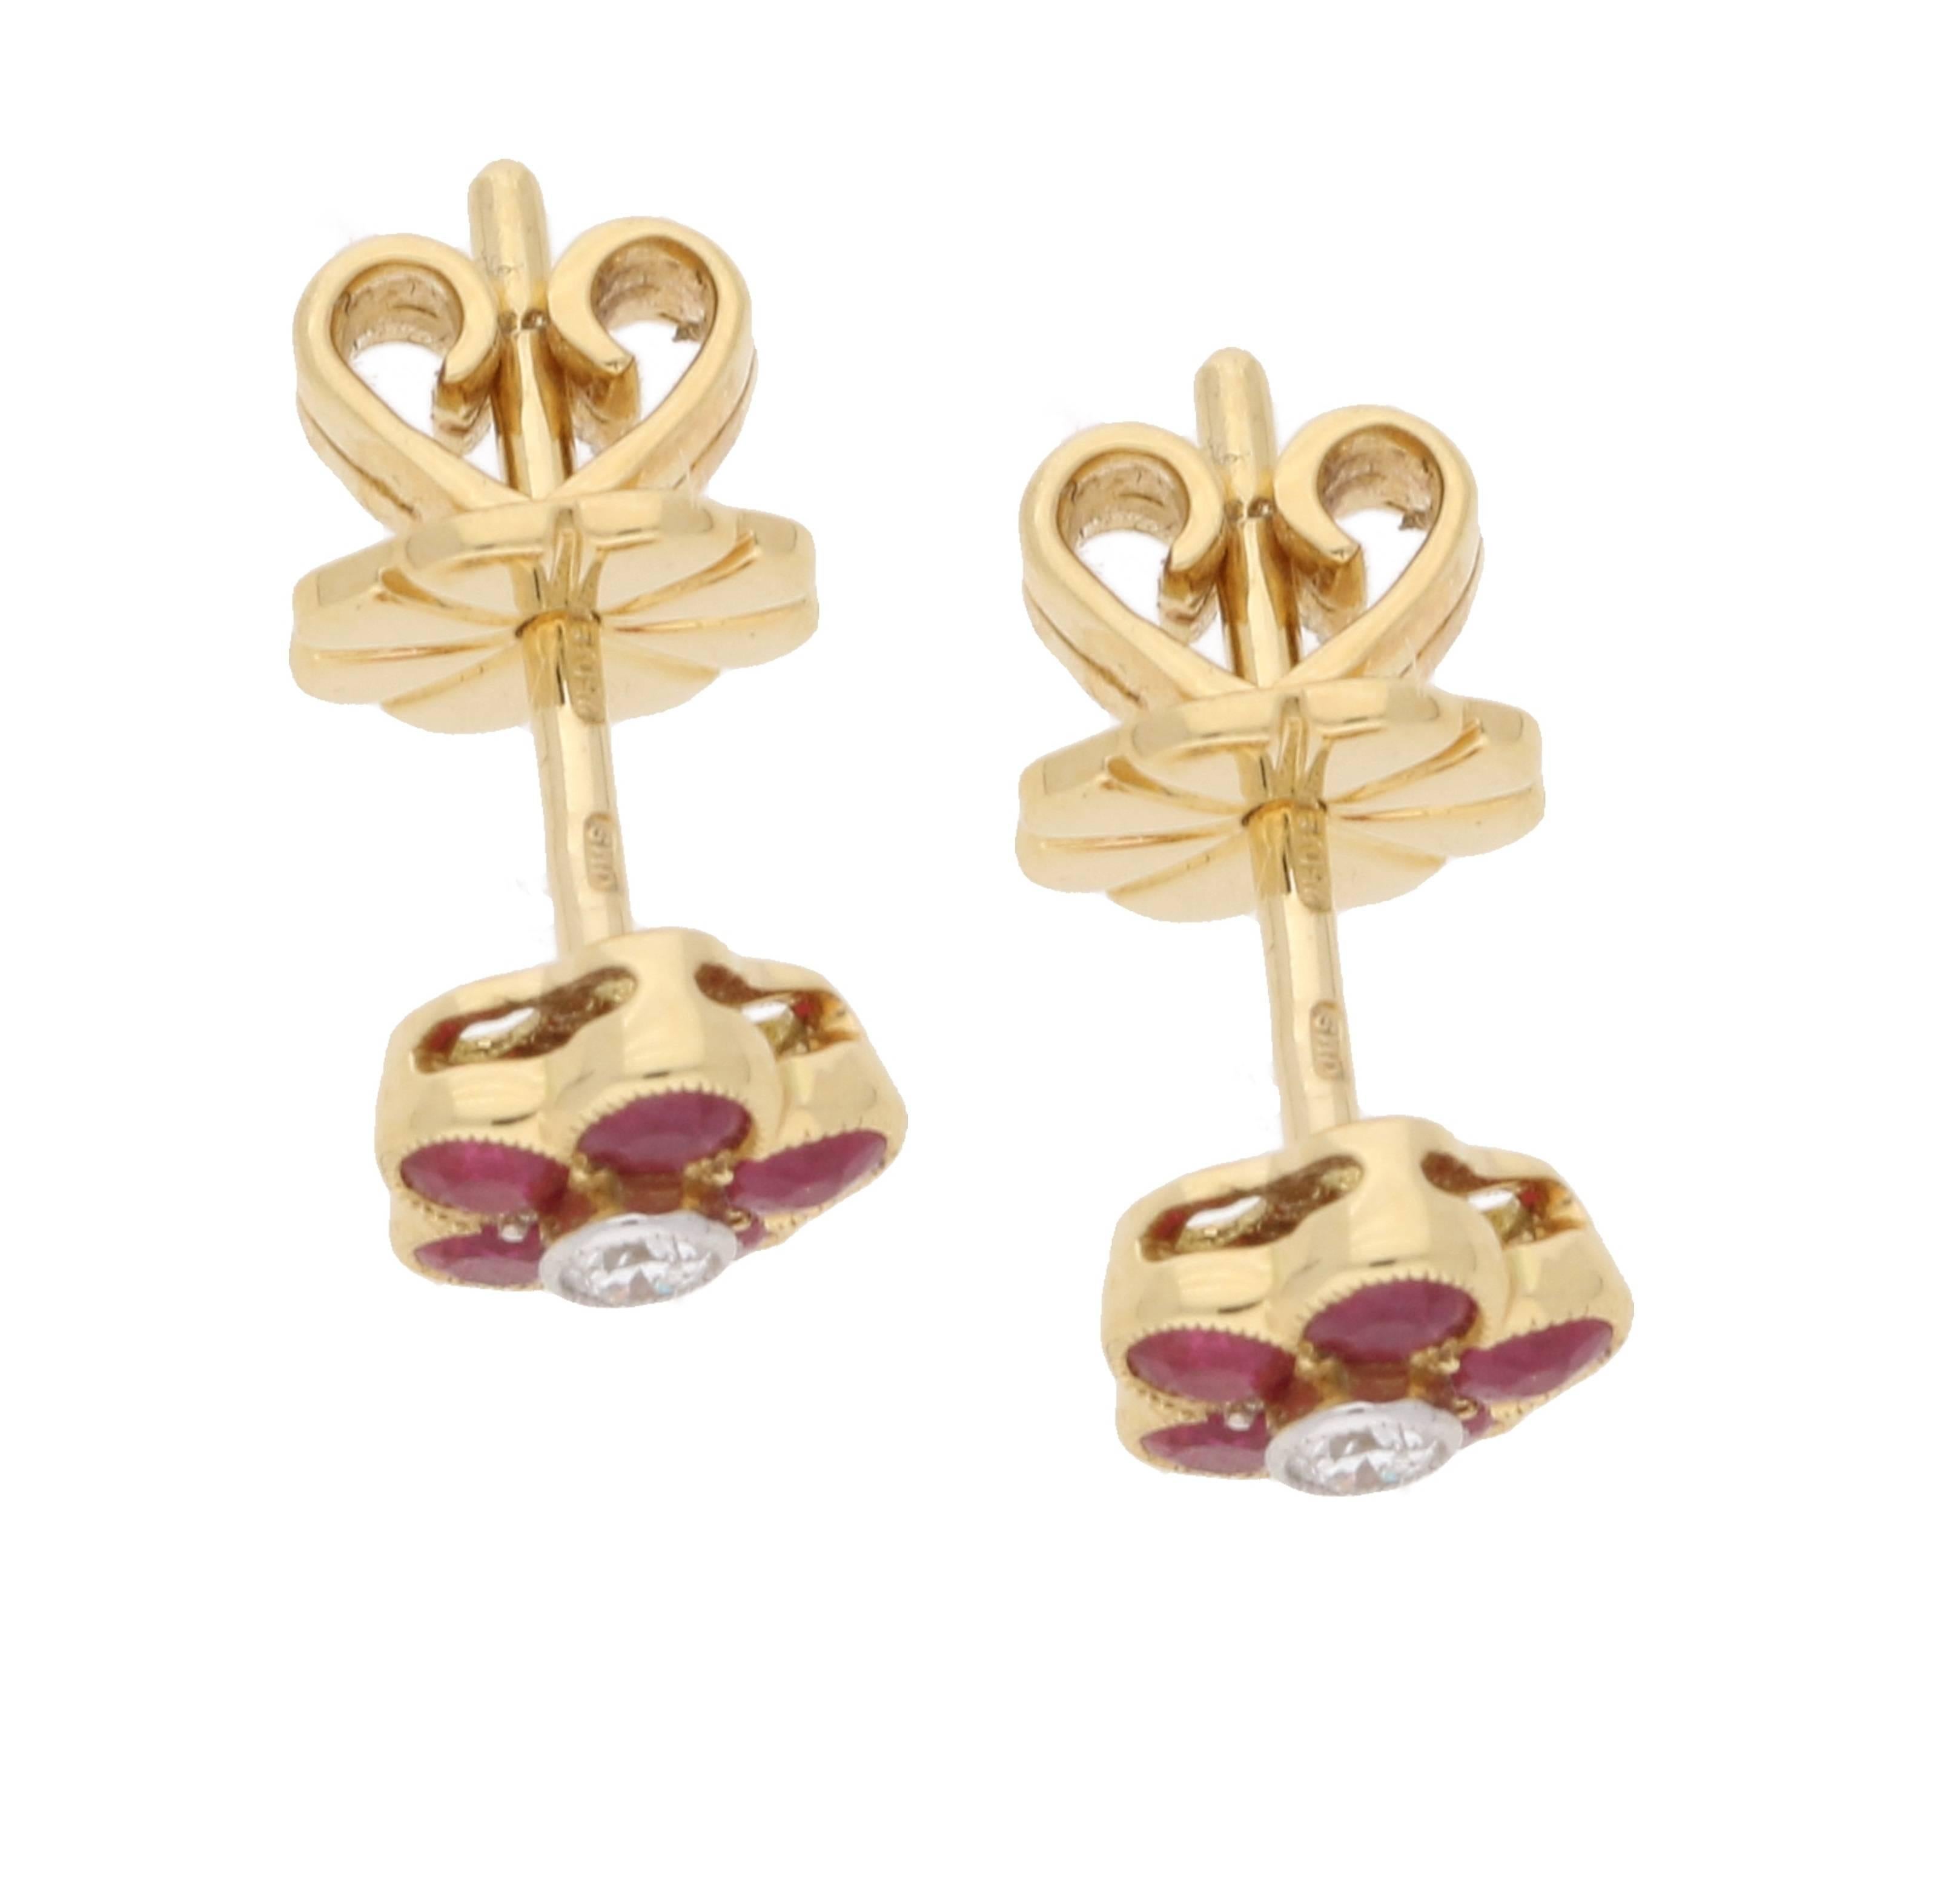 A sweet pair of floral stud earrings, detailed with five rubies surrounding a central diamond, 18ct gold and have beautiful mille grain edge detailing to the settings. These are on post and butterfly fittings. They come in a smart Susannah Lovis